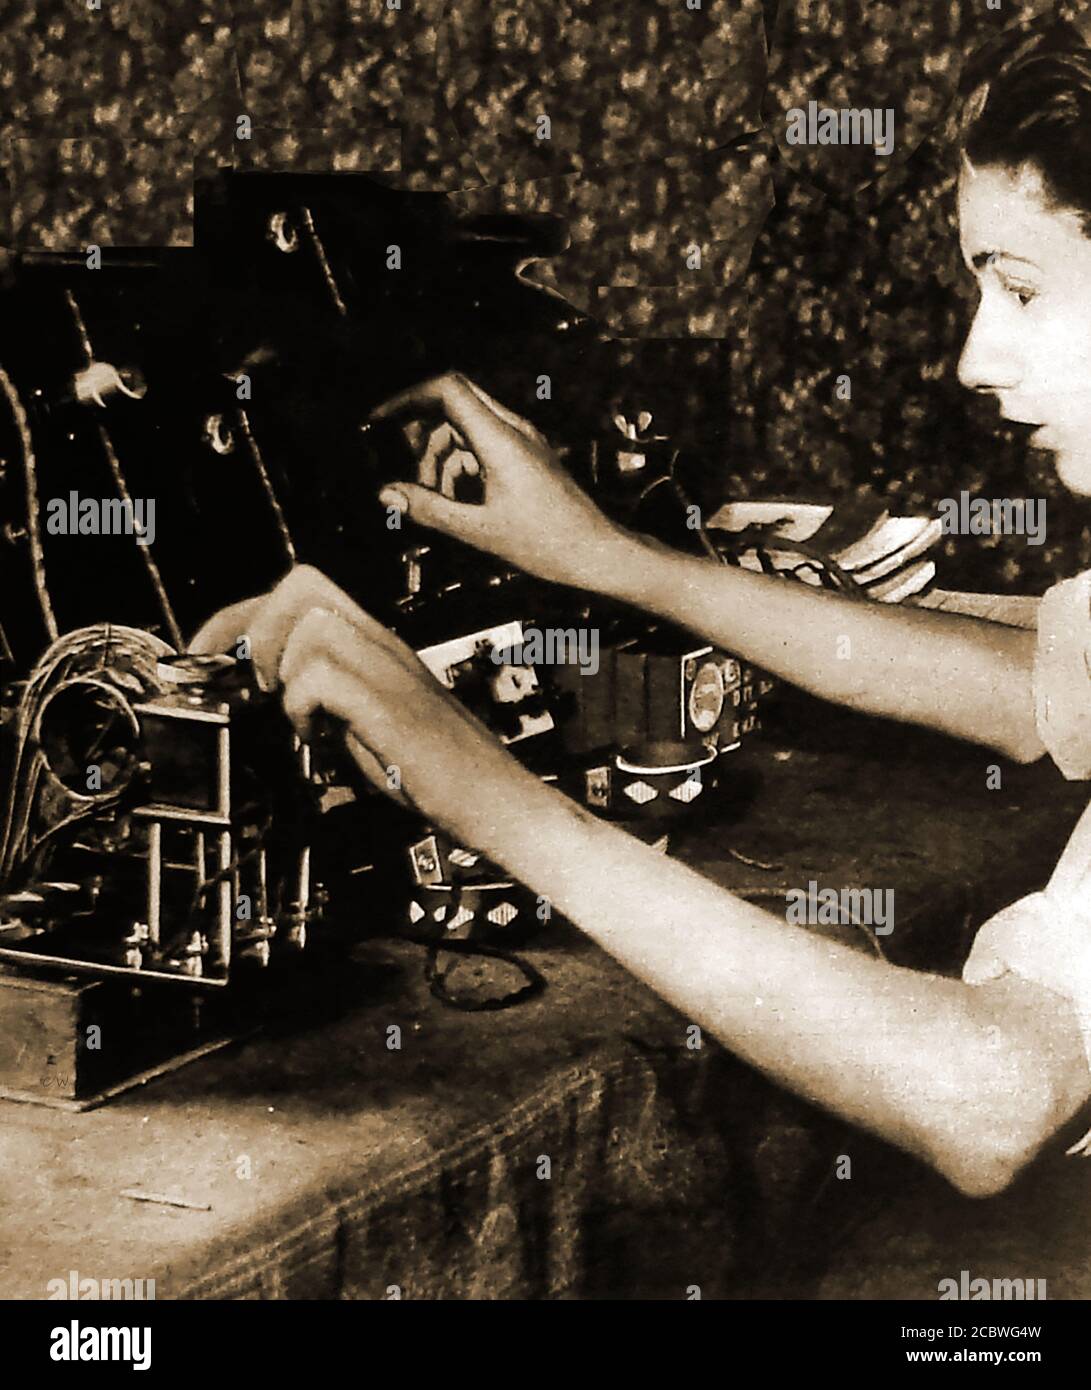 1922 A young woman operating one of the newly invented radios of the time.Analog audio (AM) was the earliest form of radio broadcast. that began around 1920. FM broadcasting was introduced in the late 1930s Stock Photo